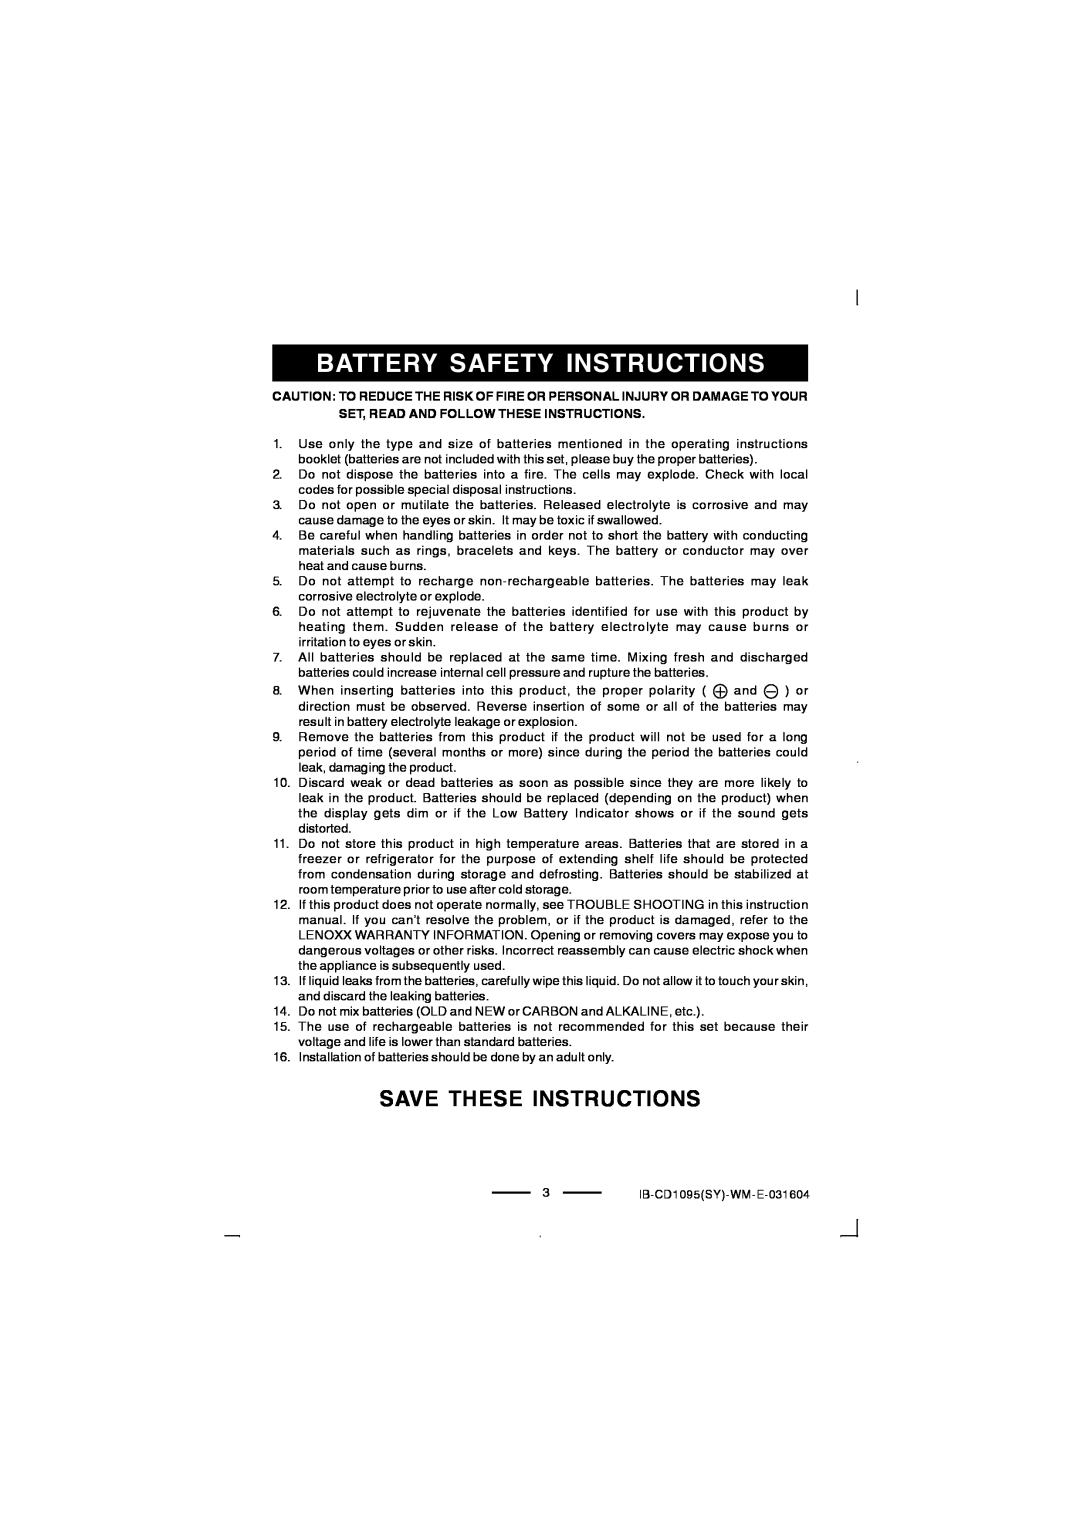 Lenoxx Electronics CD-1095 manual Save These Instructions, Battery Safety Instructions 